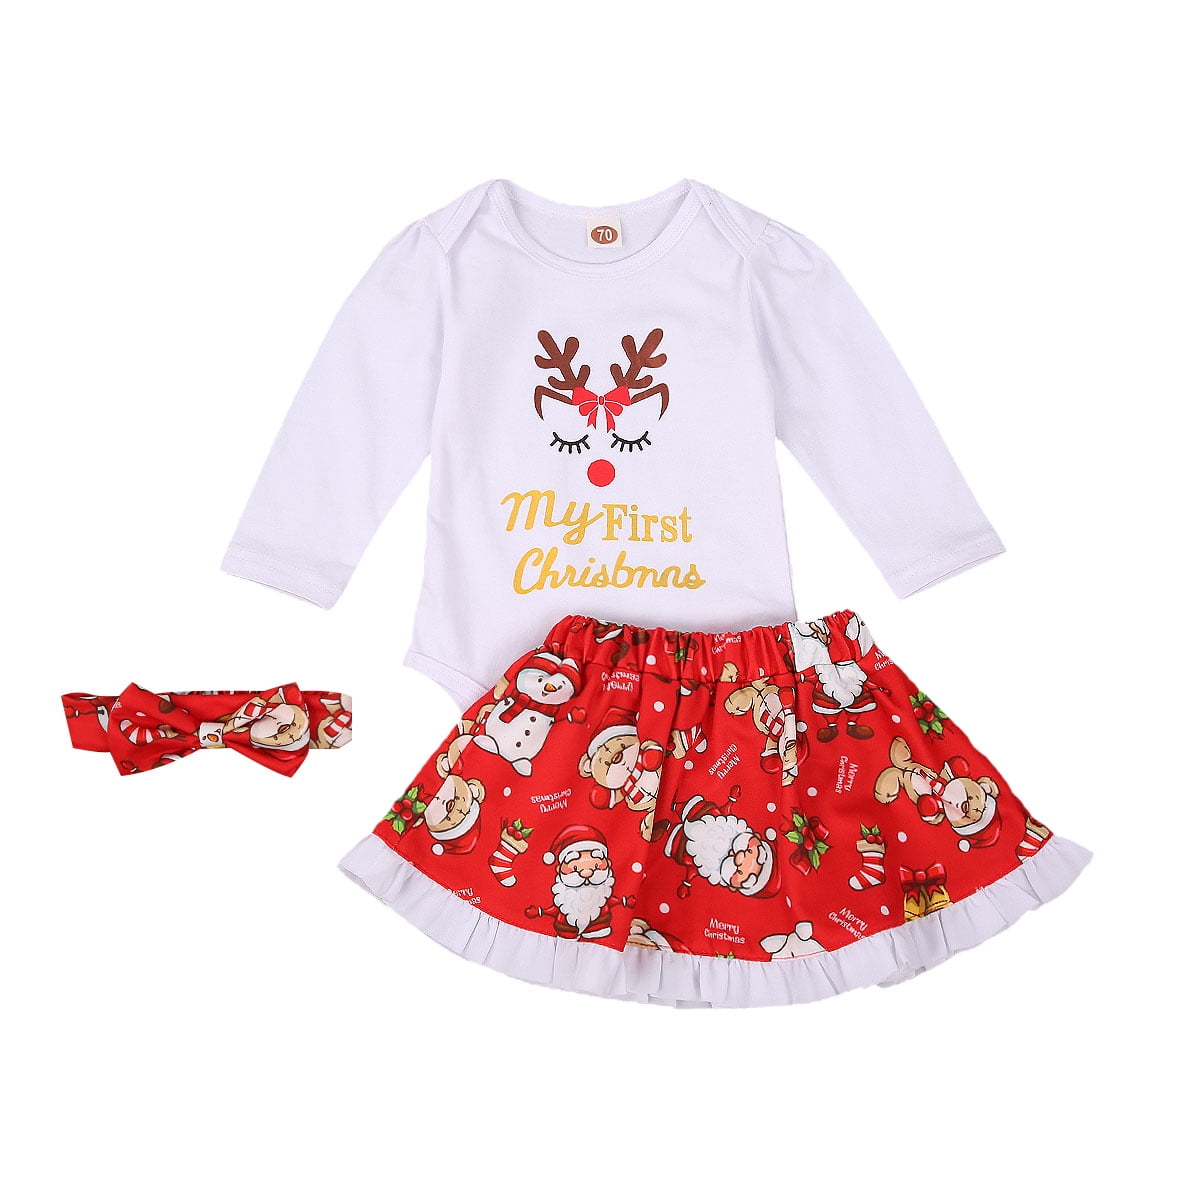 ~ NOUVEAU ~ Baby Girls Graphic shirts Skorts jupe shorts 6-9 12 18 24 mois 2 T 3 T 4 T 